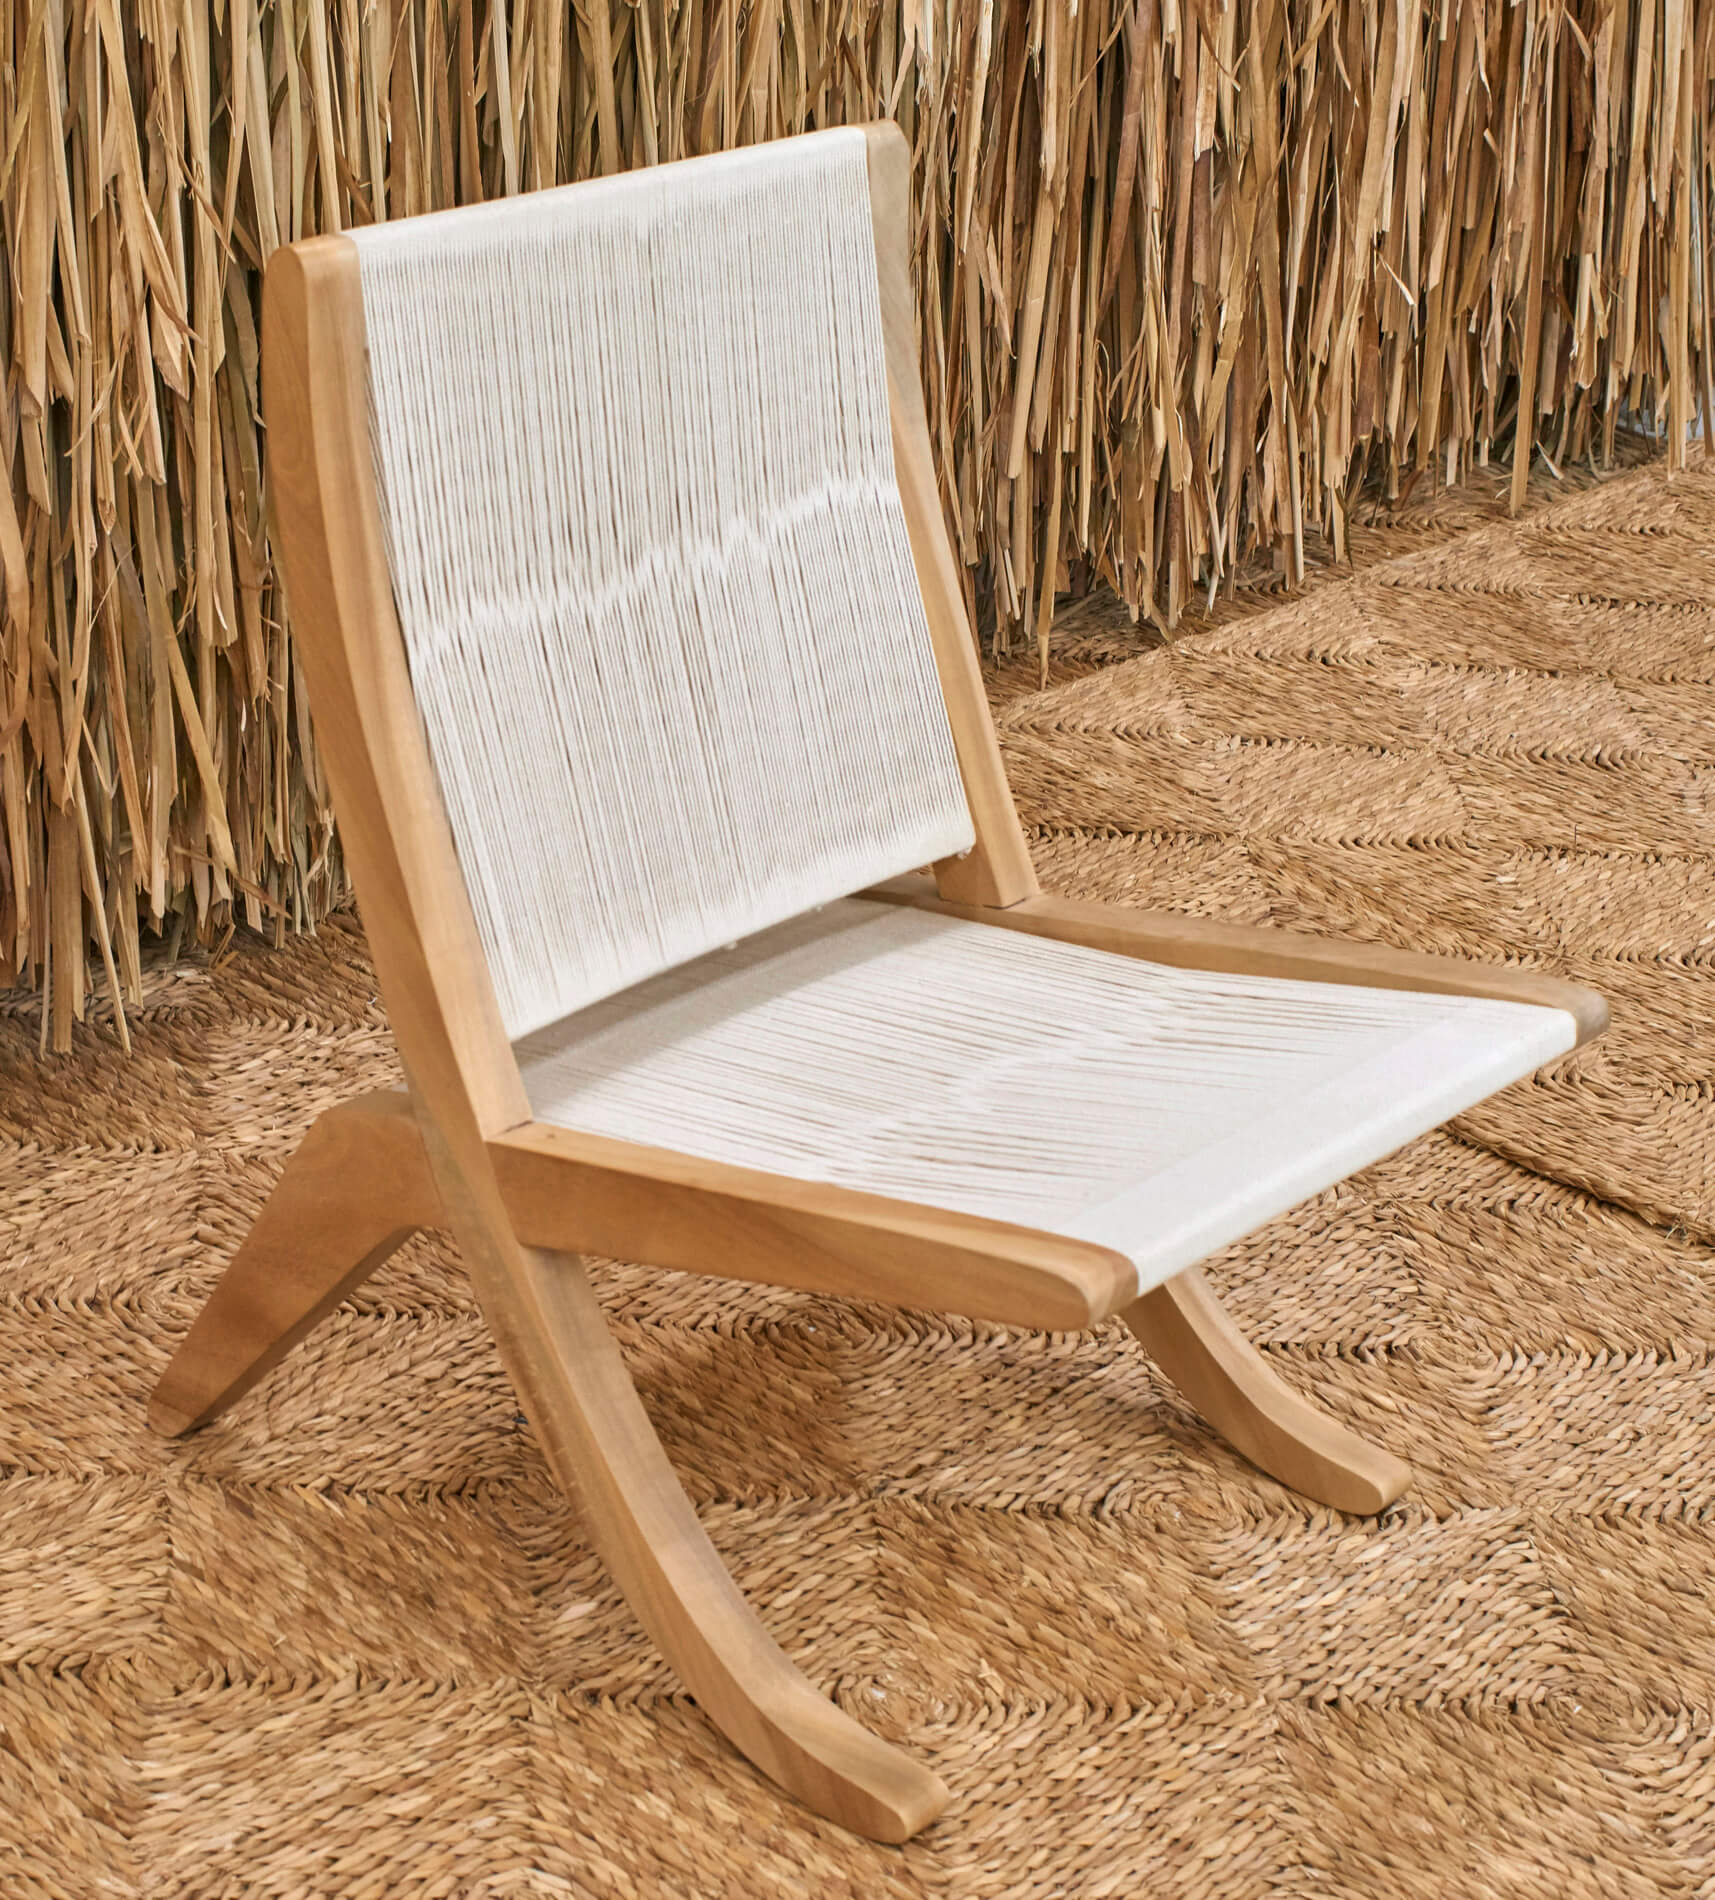 Jorge Gonzalez’s After Arklu chair, 2016. Woven cotton cord on constructed wood. 80 x 68.5 x 55.2 cm /31 1/2 x 27 x 21 3/4 in. $ 4,000